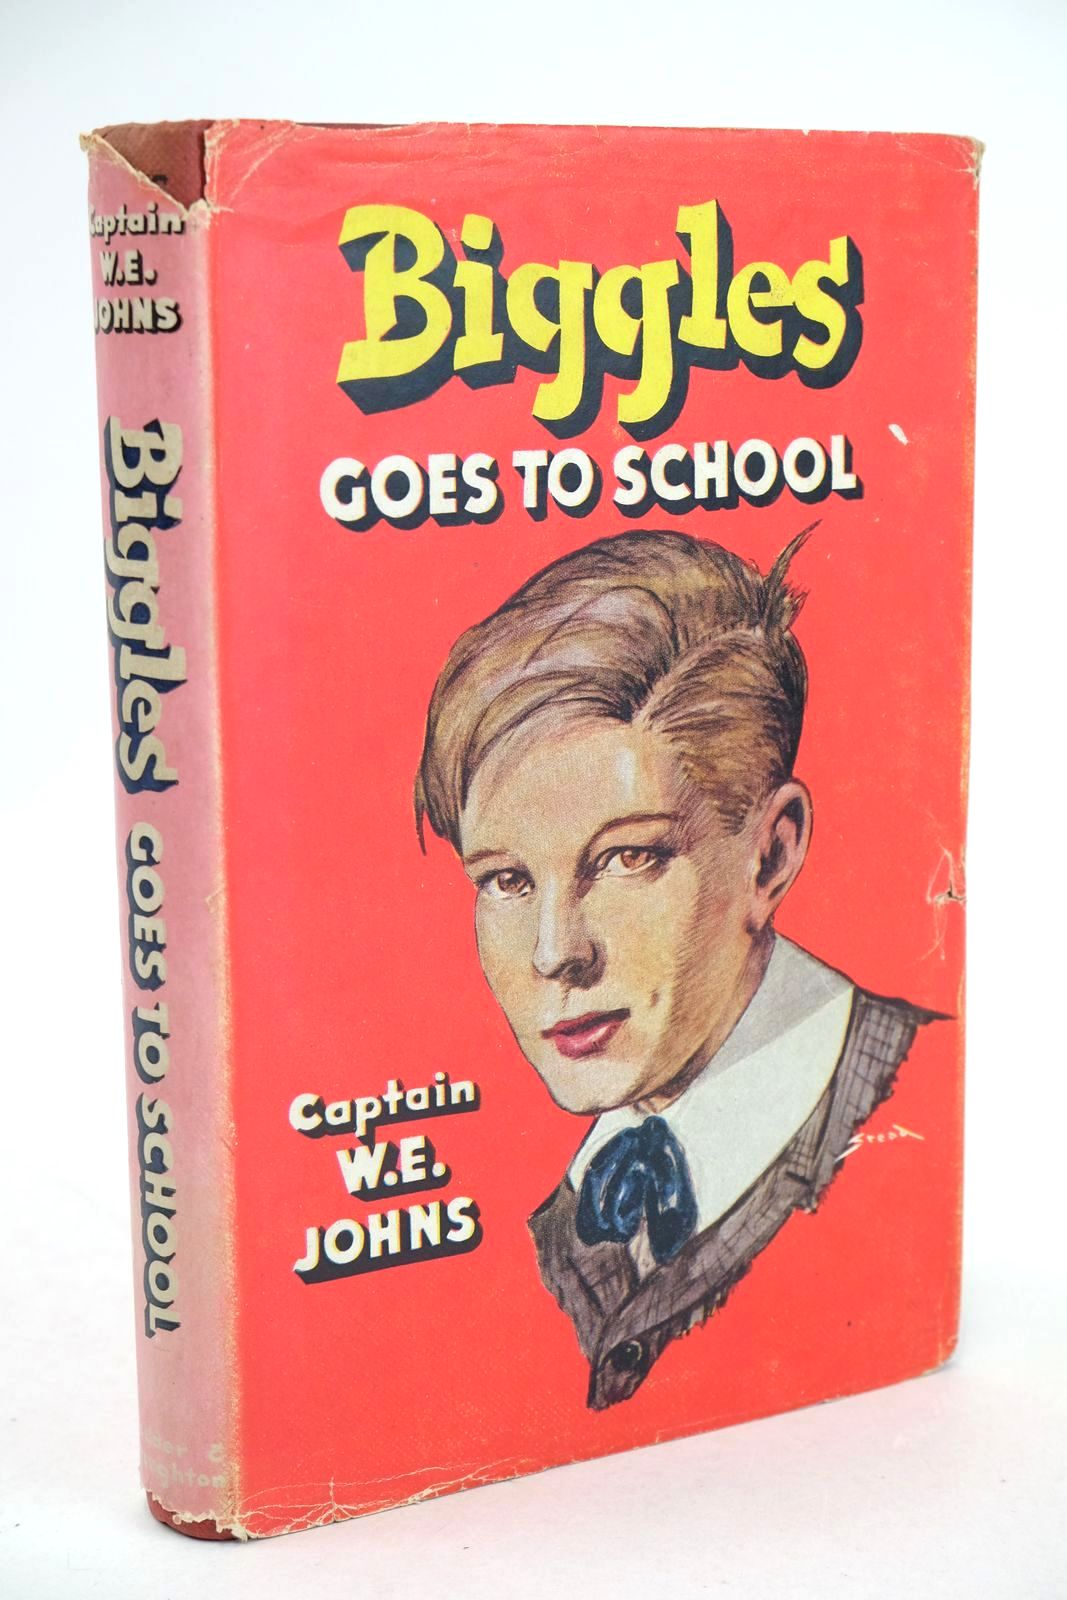 Photo of BIGGLES GOES TO SCHOOL written by Johns, W.E. illustrated by Stead,  published by Hodder &amp; Stoughton (STOCK CODE: 1326110)  for sale by Stella & Rose's Books